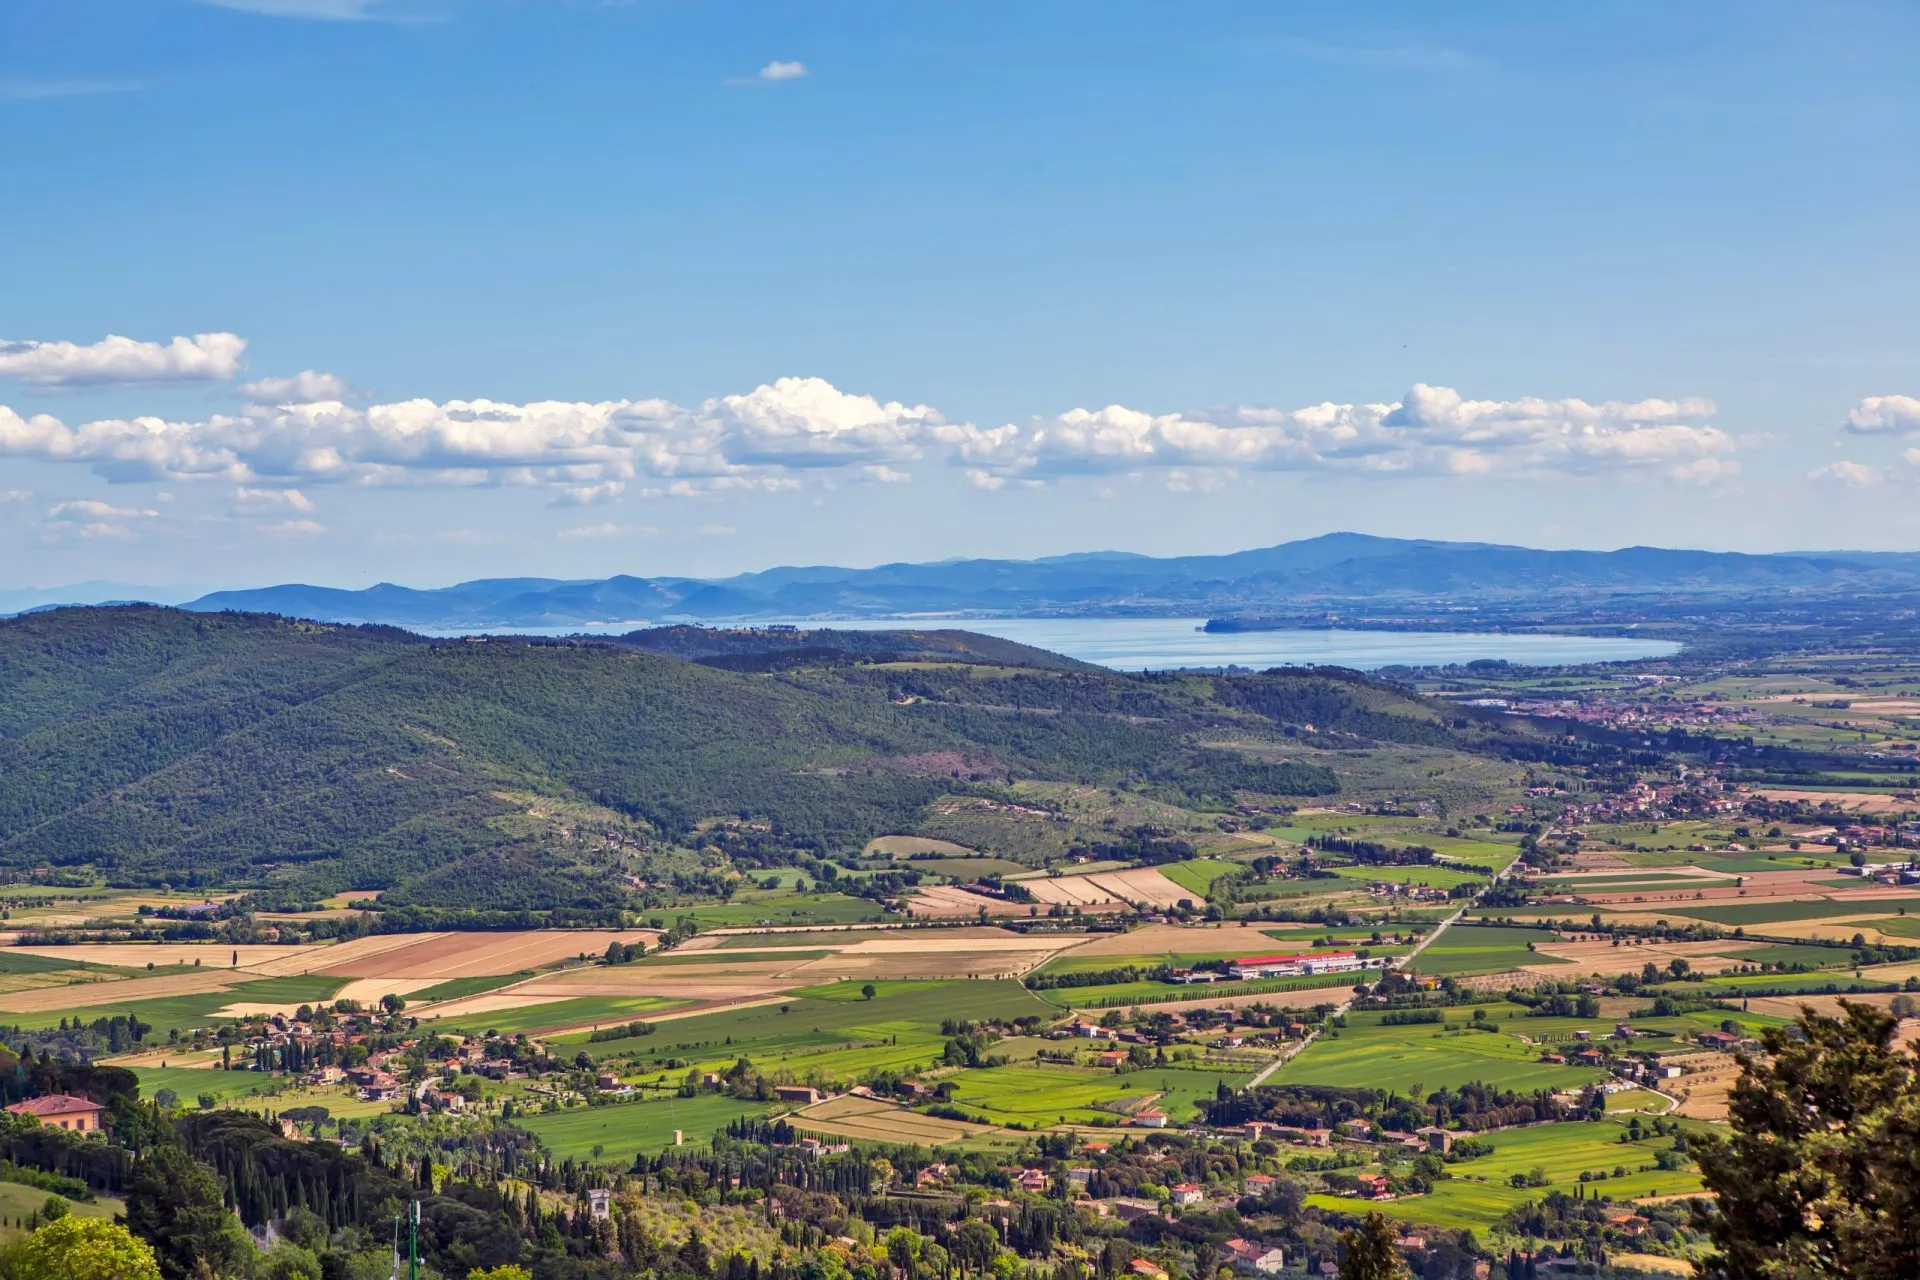 Lake Trasimeno is surrounded on three sides by hills. Umbria. Italy